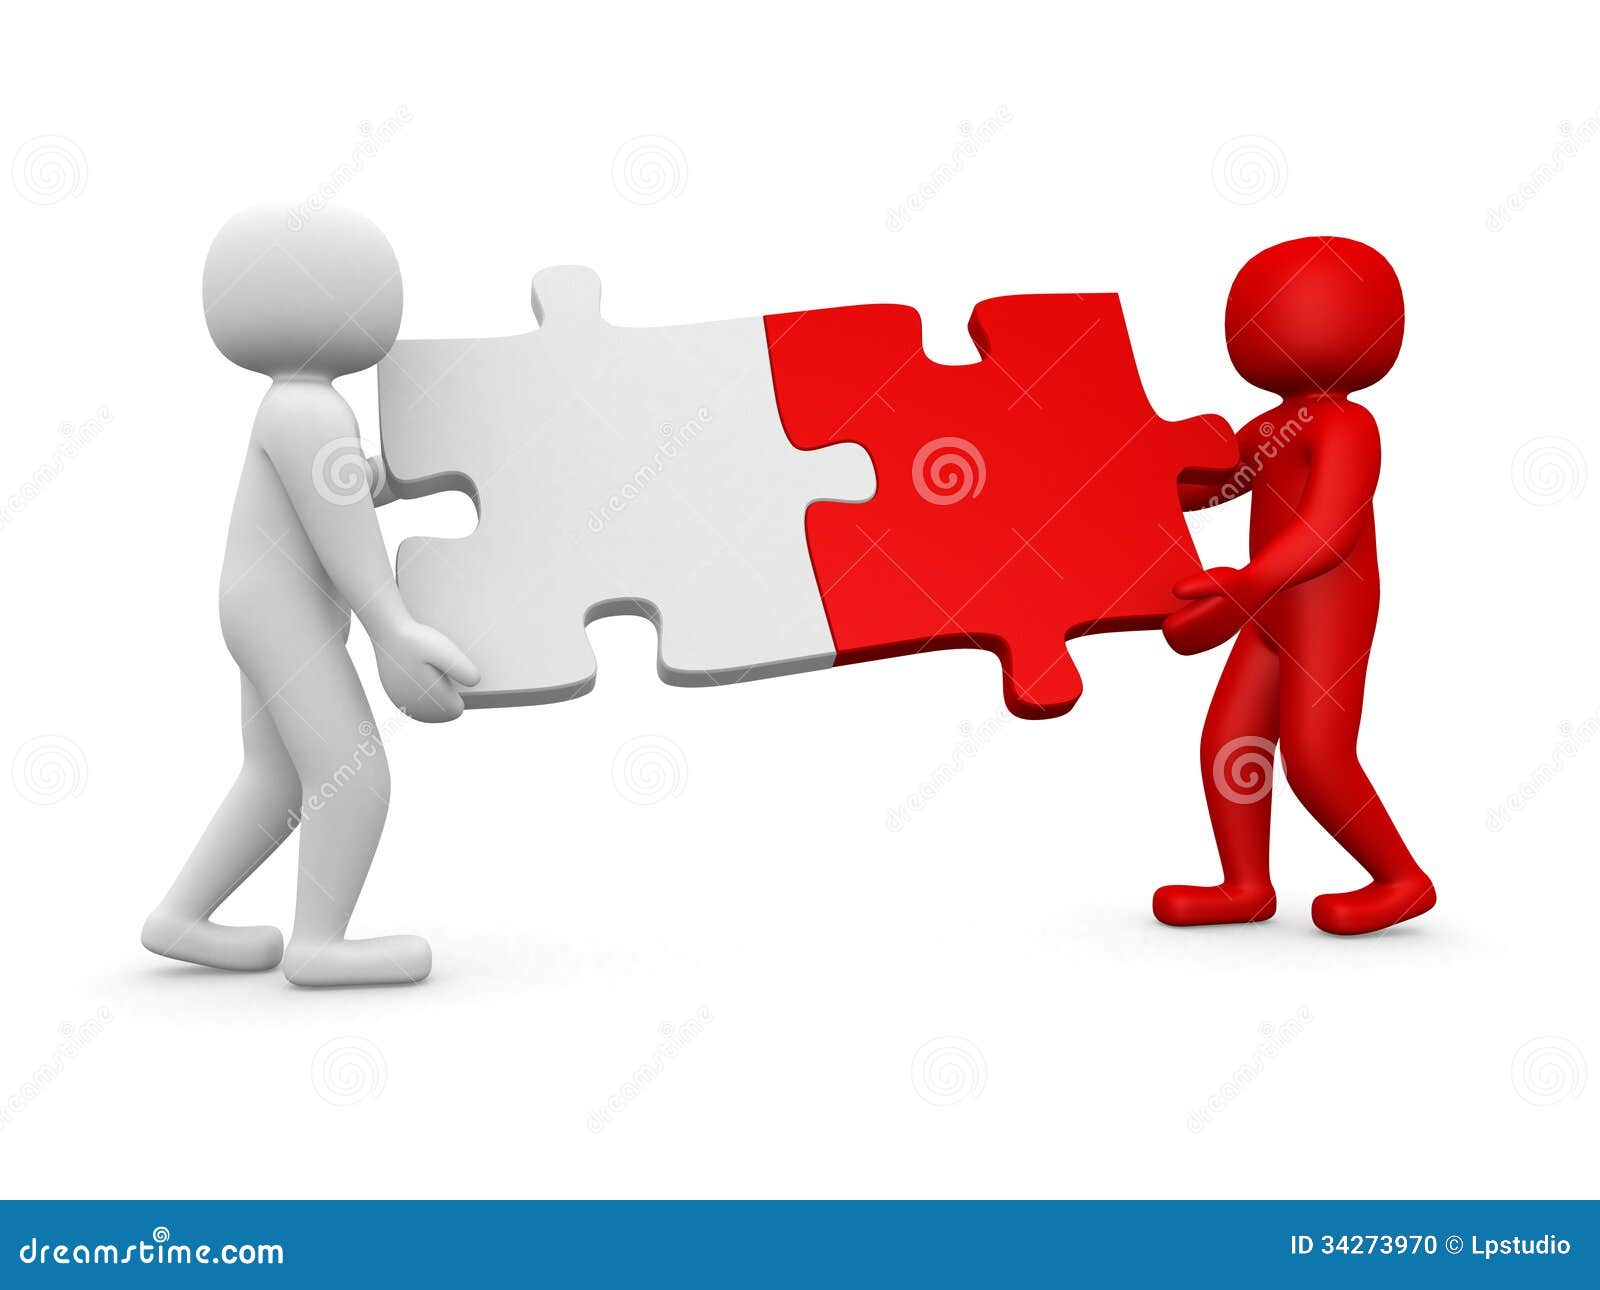 Two Person Matching Puzzle Pieces Stock Photo - Image: 34273970